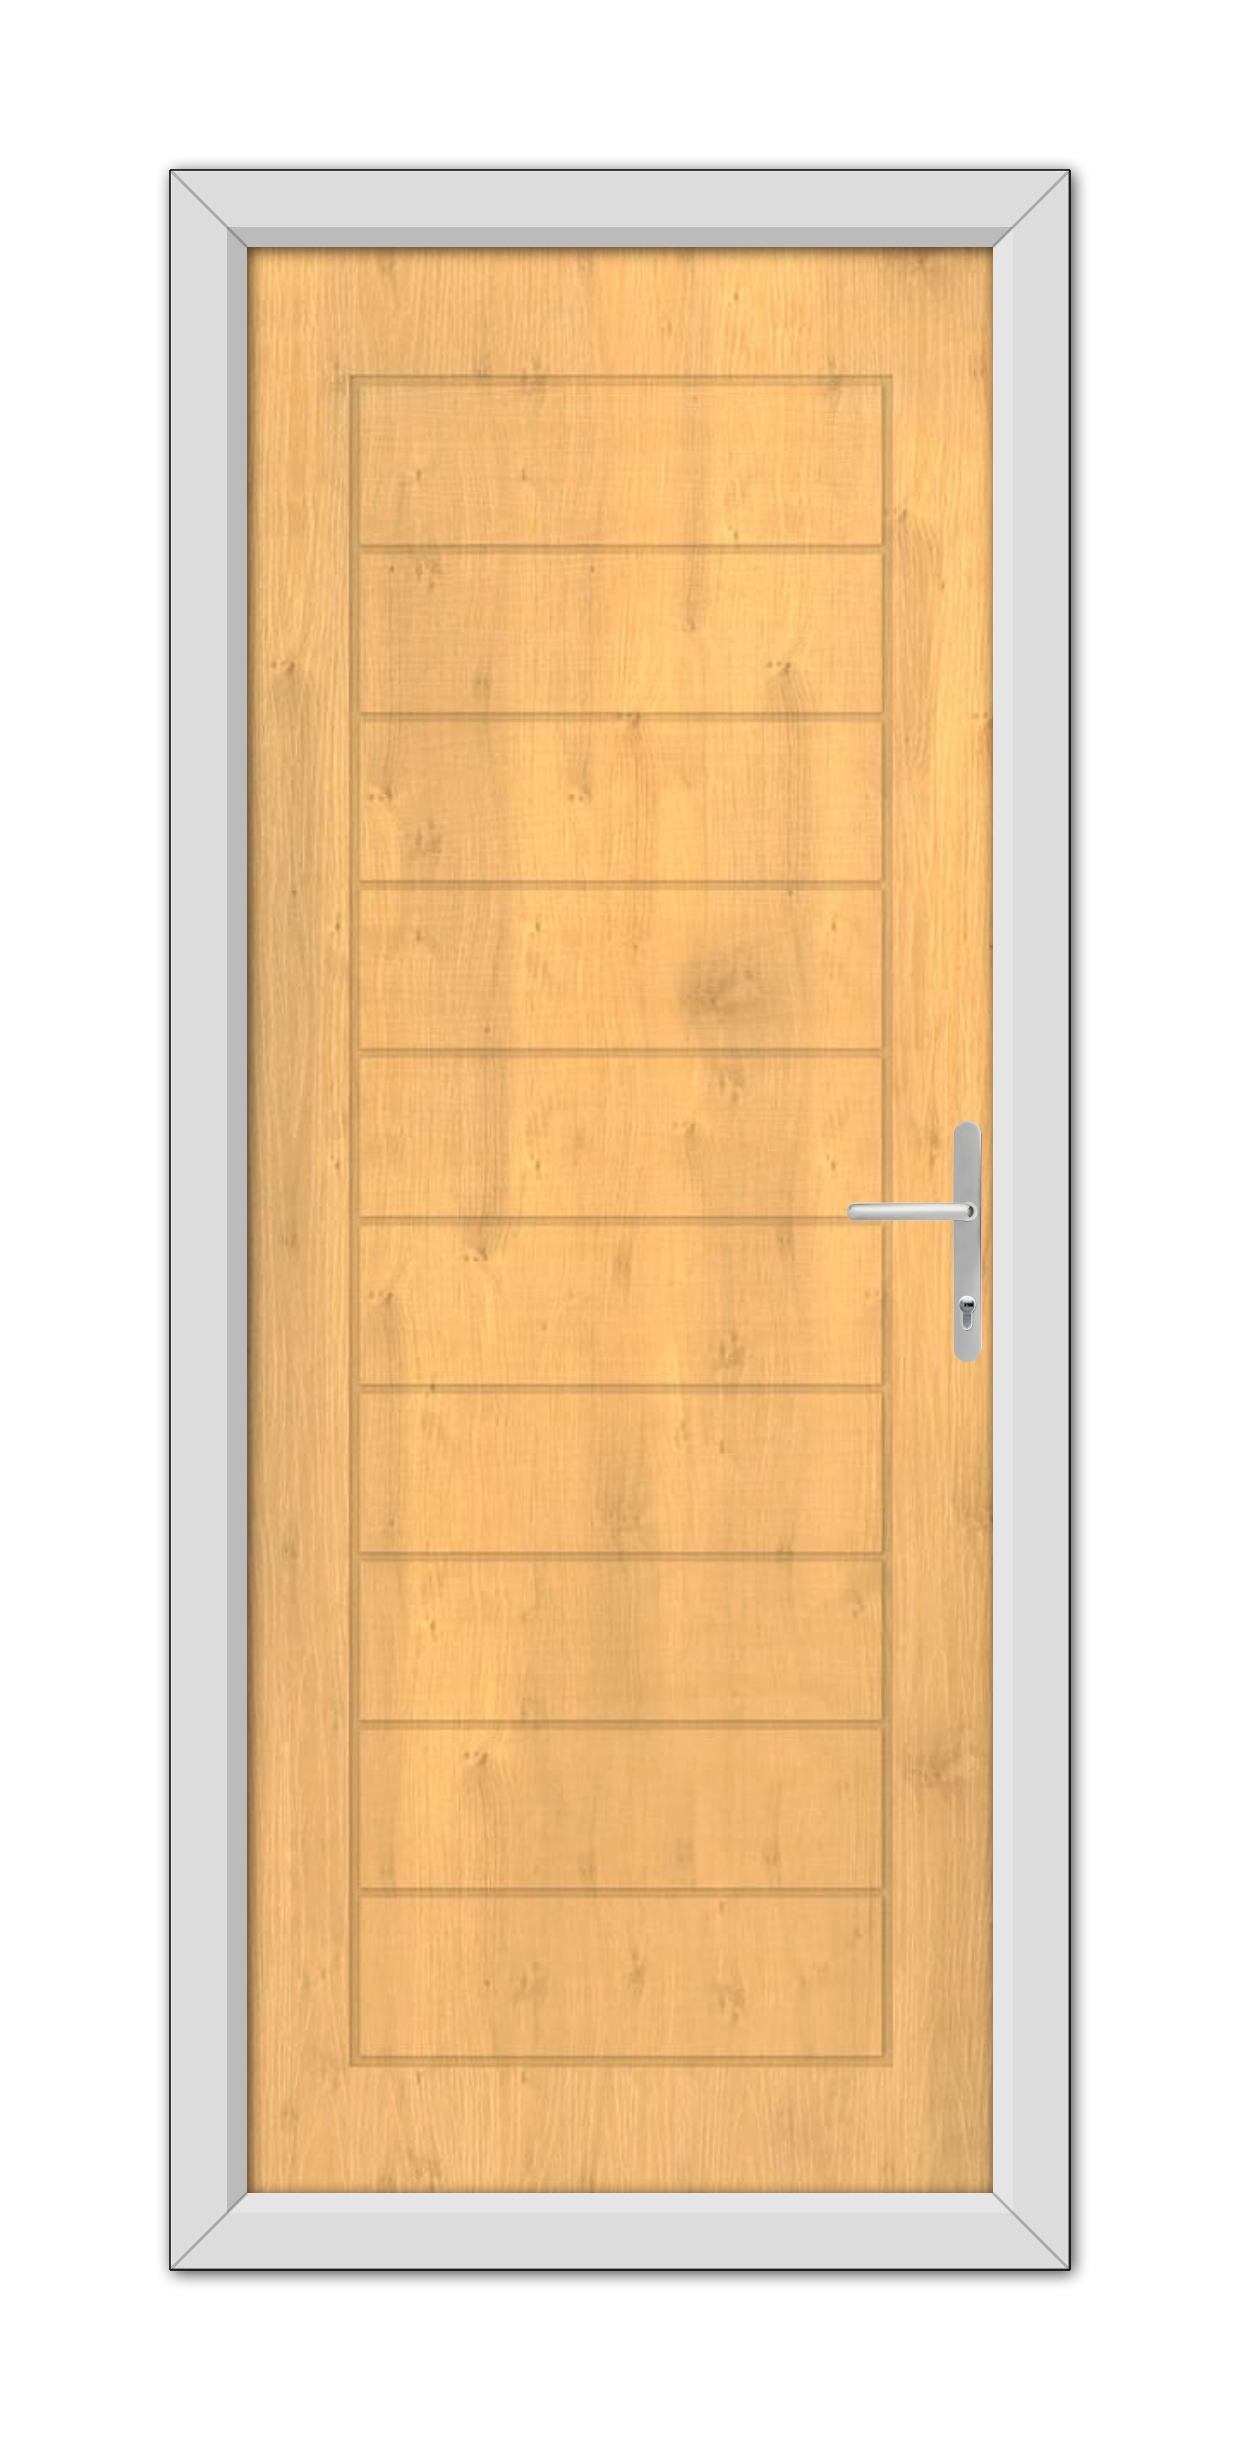 An Irish Oak Cambridge Composite Door 48mm Timber Core with a metal handle, set within a gray frame, viewed from the front.